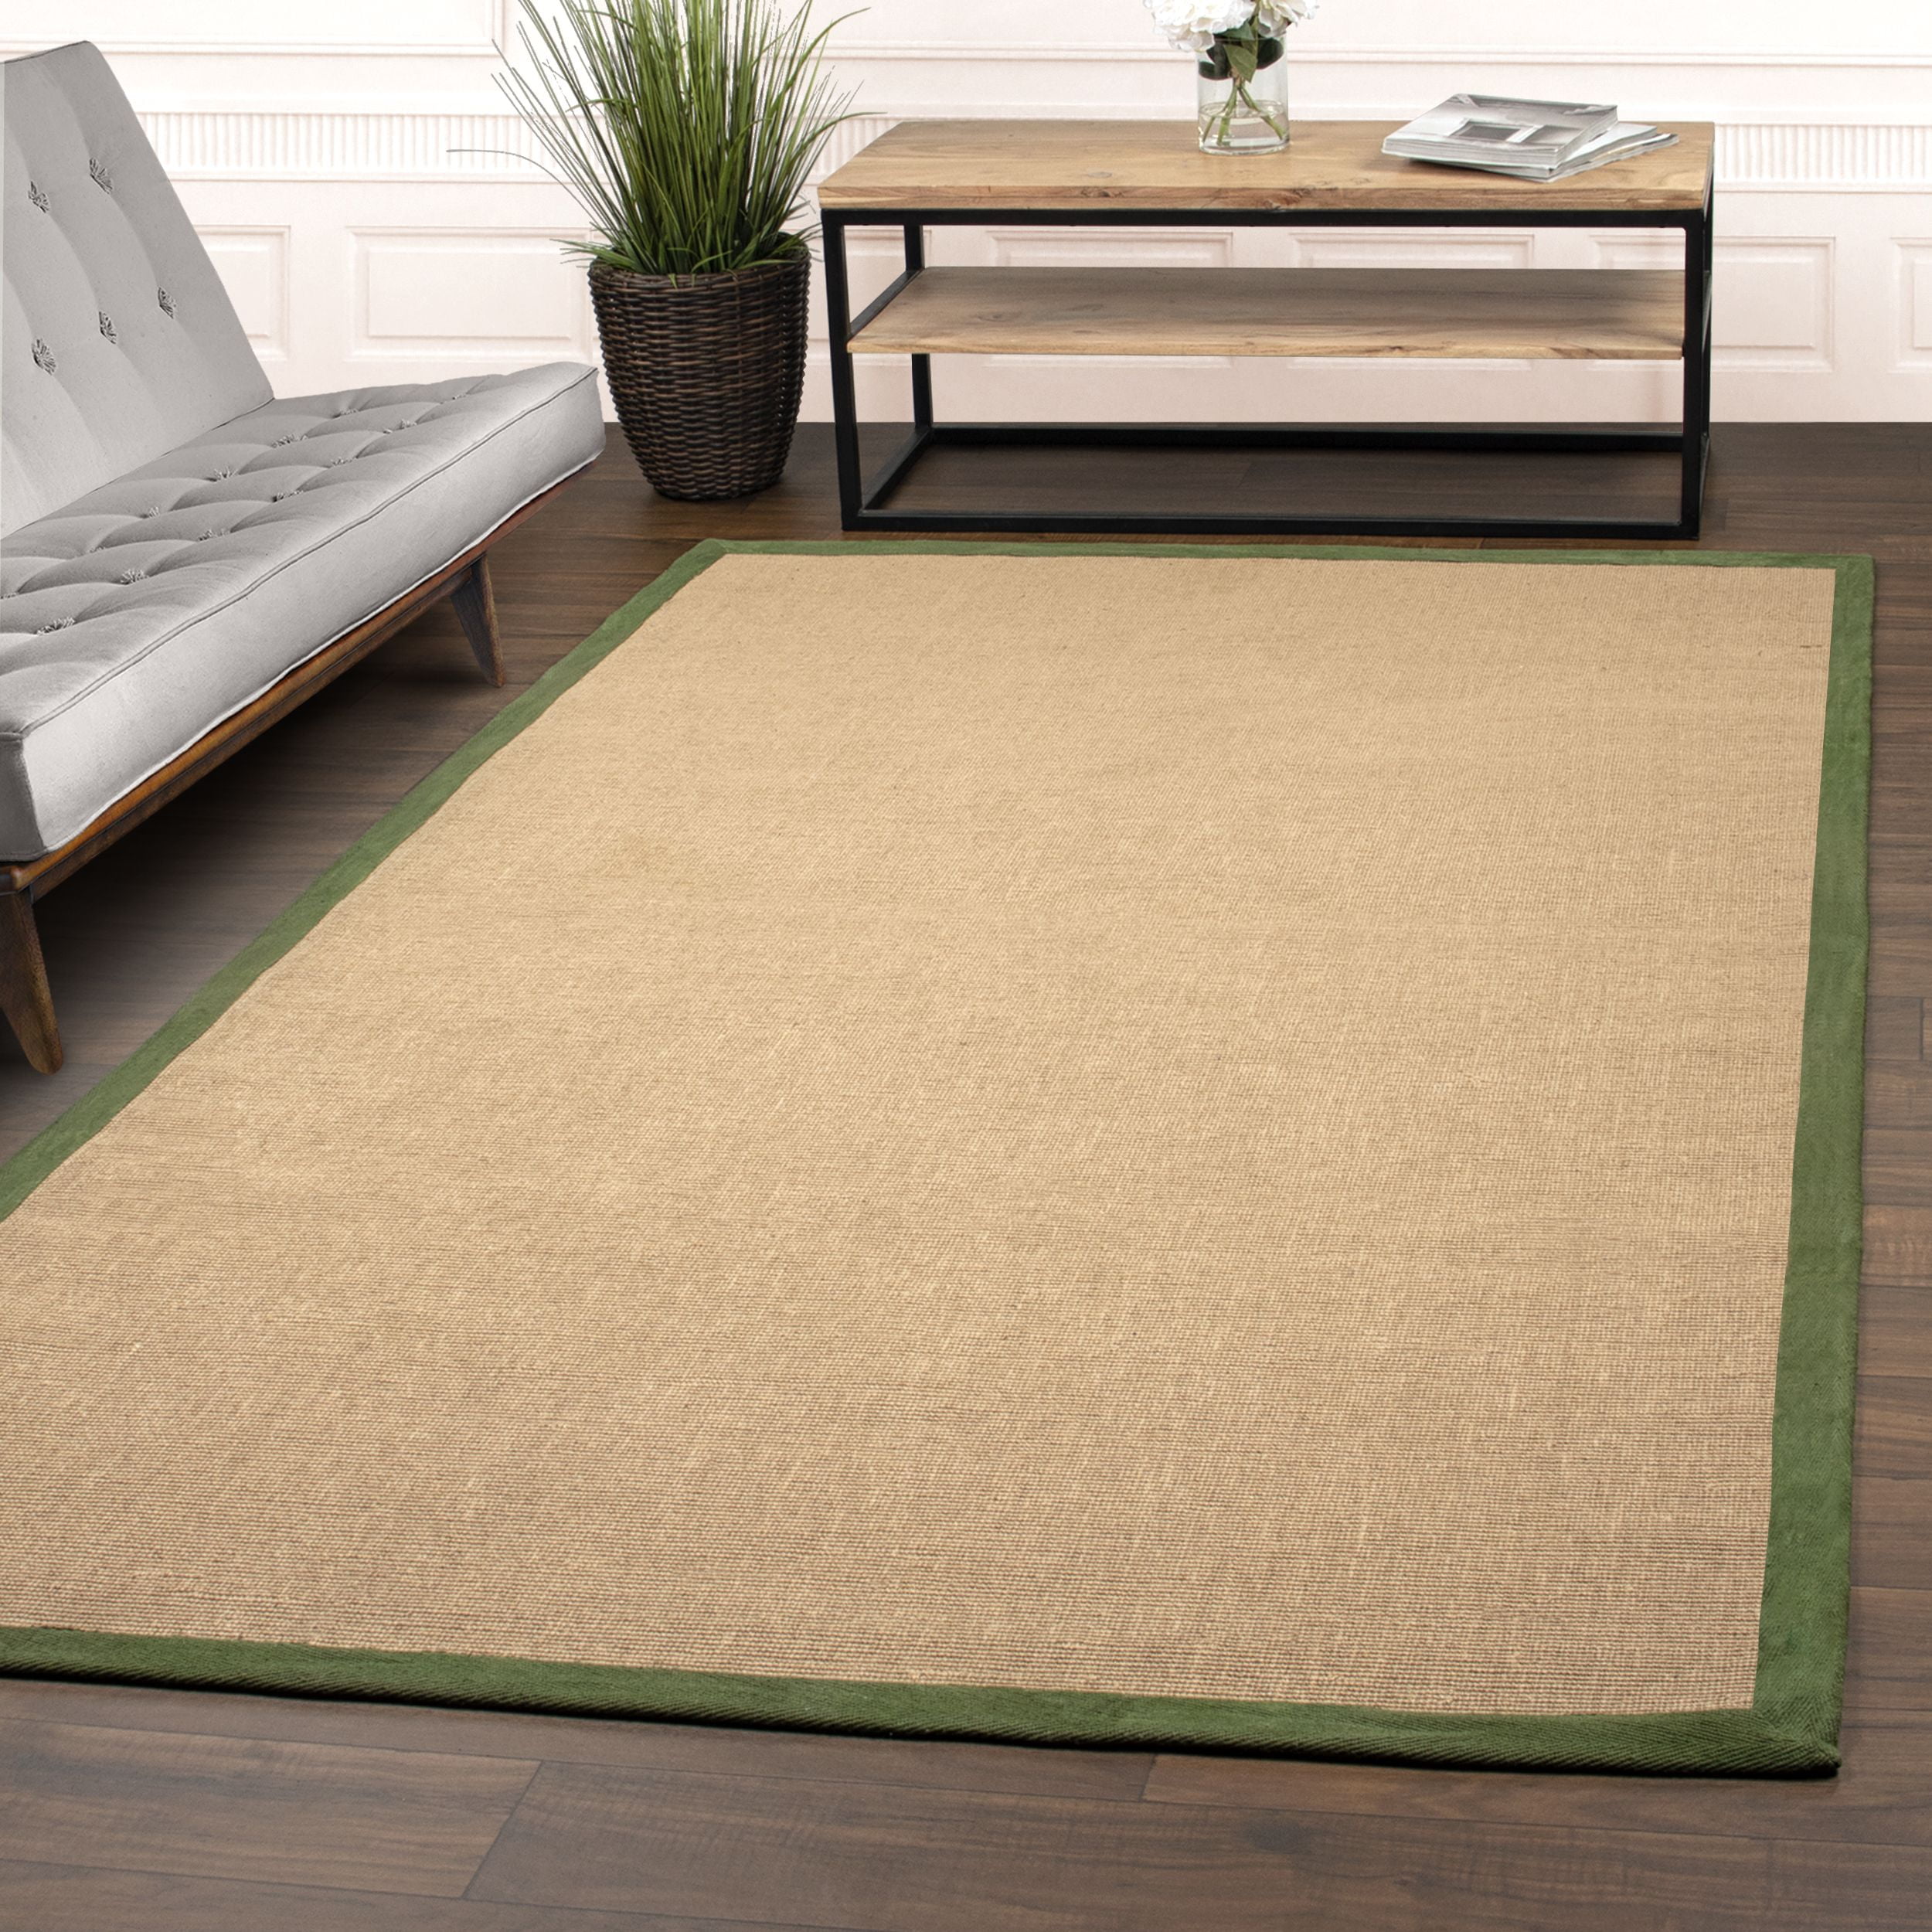 Jute Rug Natural  7X10 Ft Rustic look Hand Braided style Home Decor Outdoor Rugs 